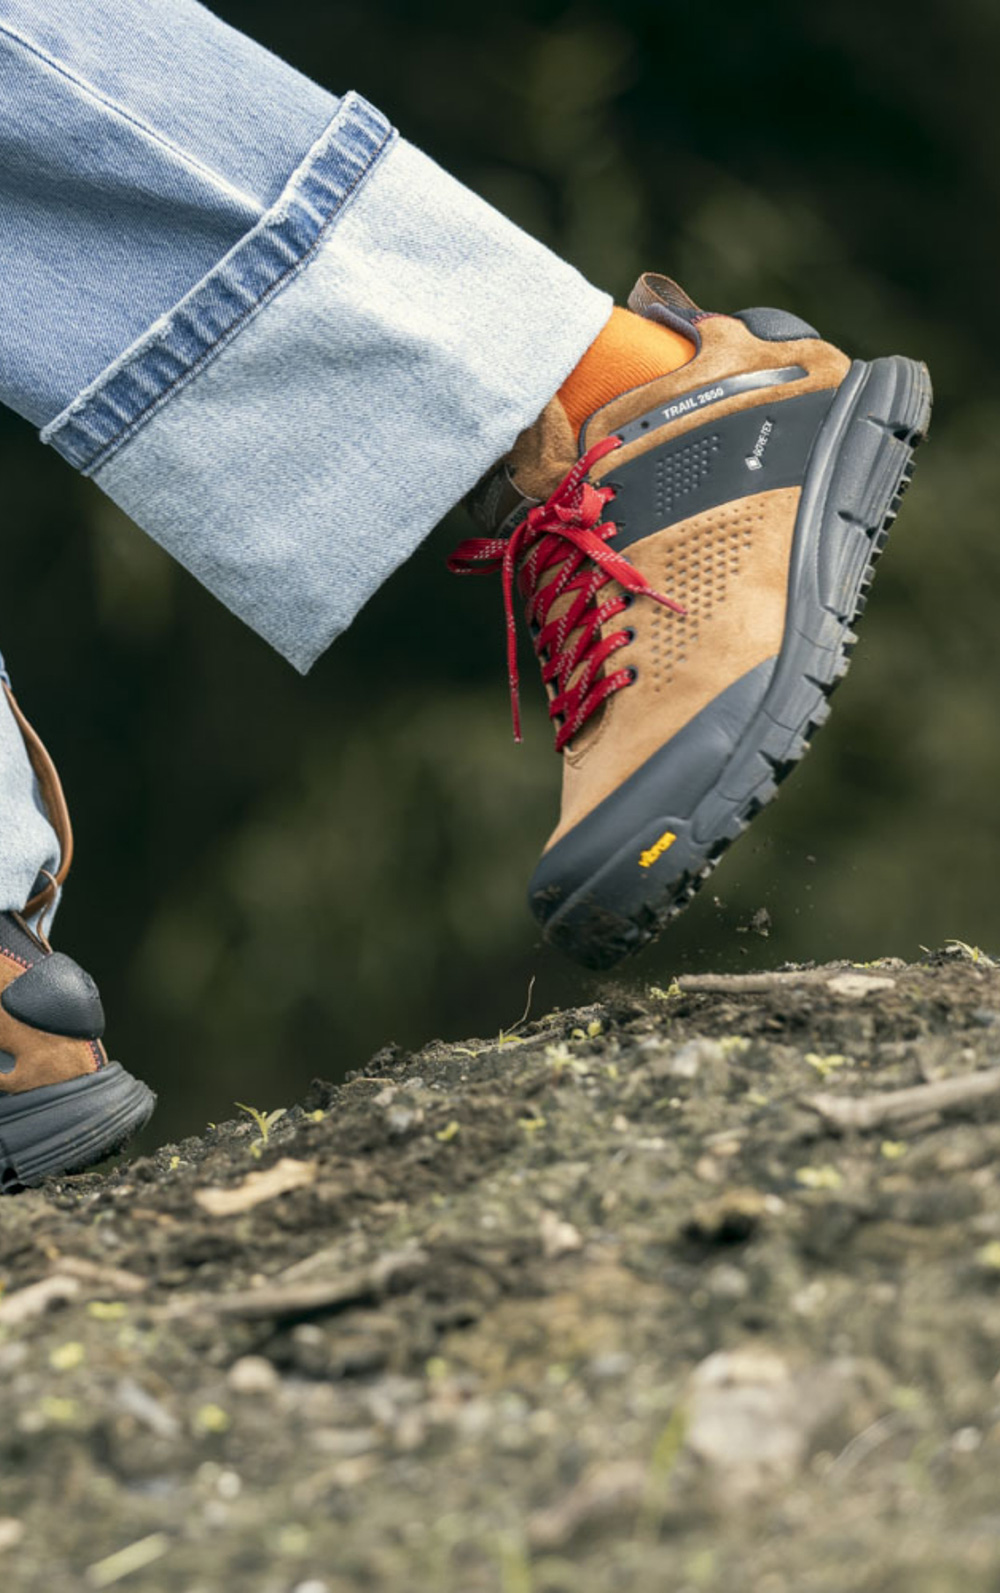 2023 FALL / WINTER DANNER IDENTITY “TRUST&FUNCTION” OUTDOOR COLLECTION 